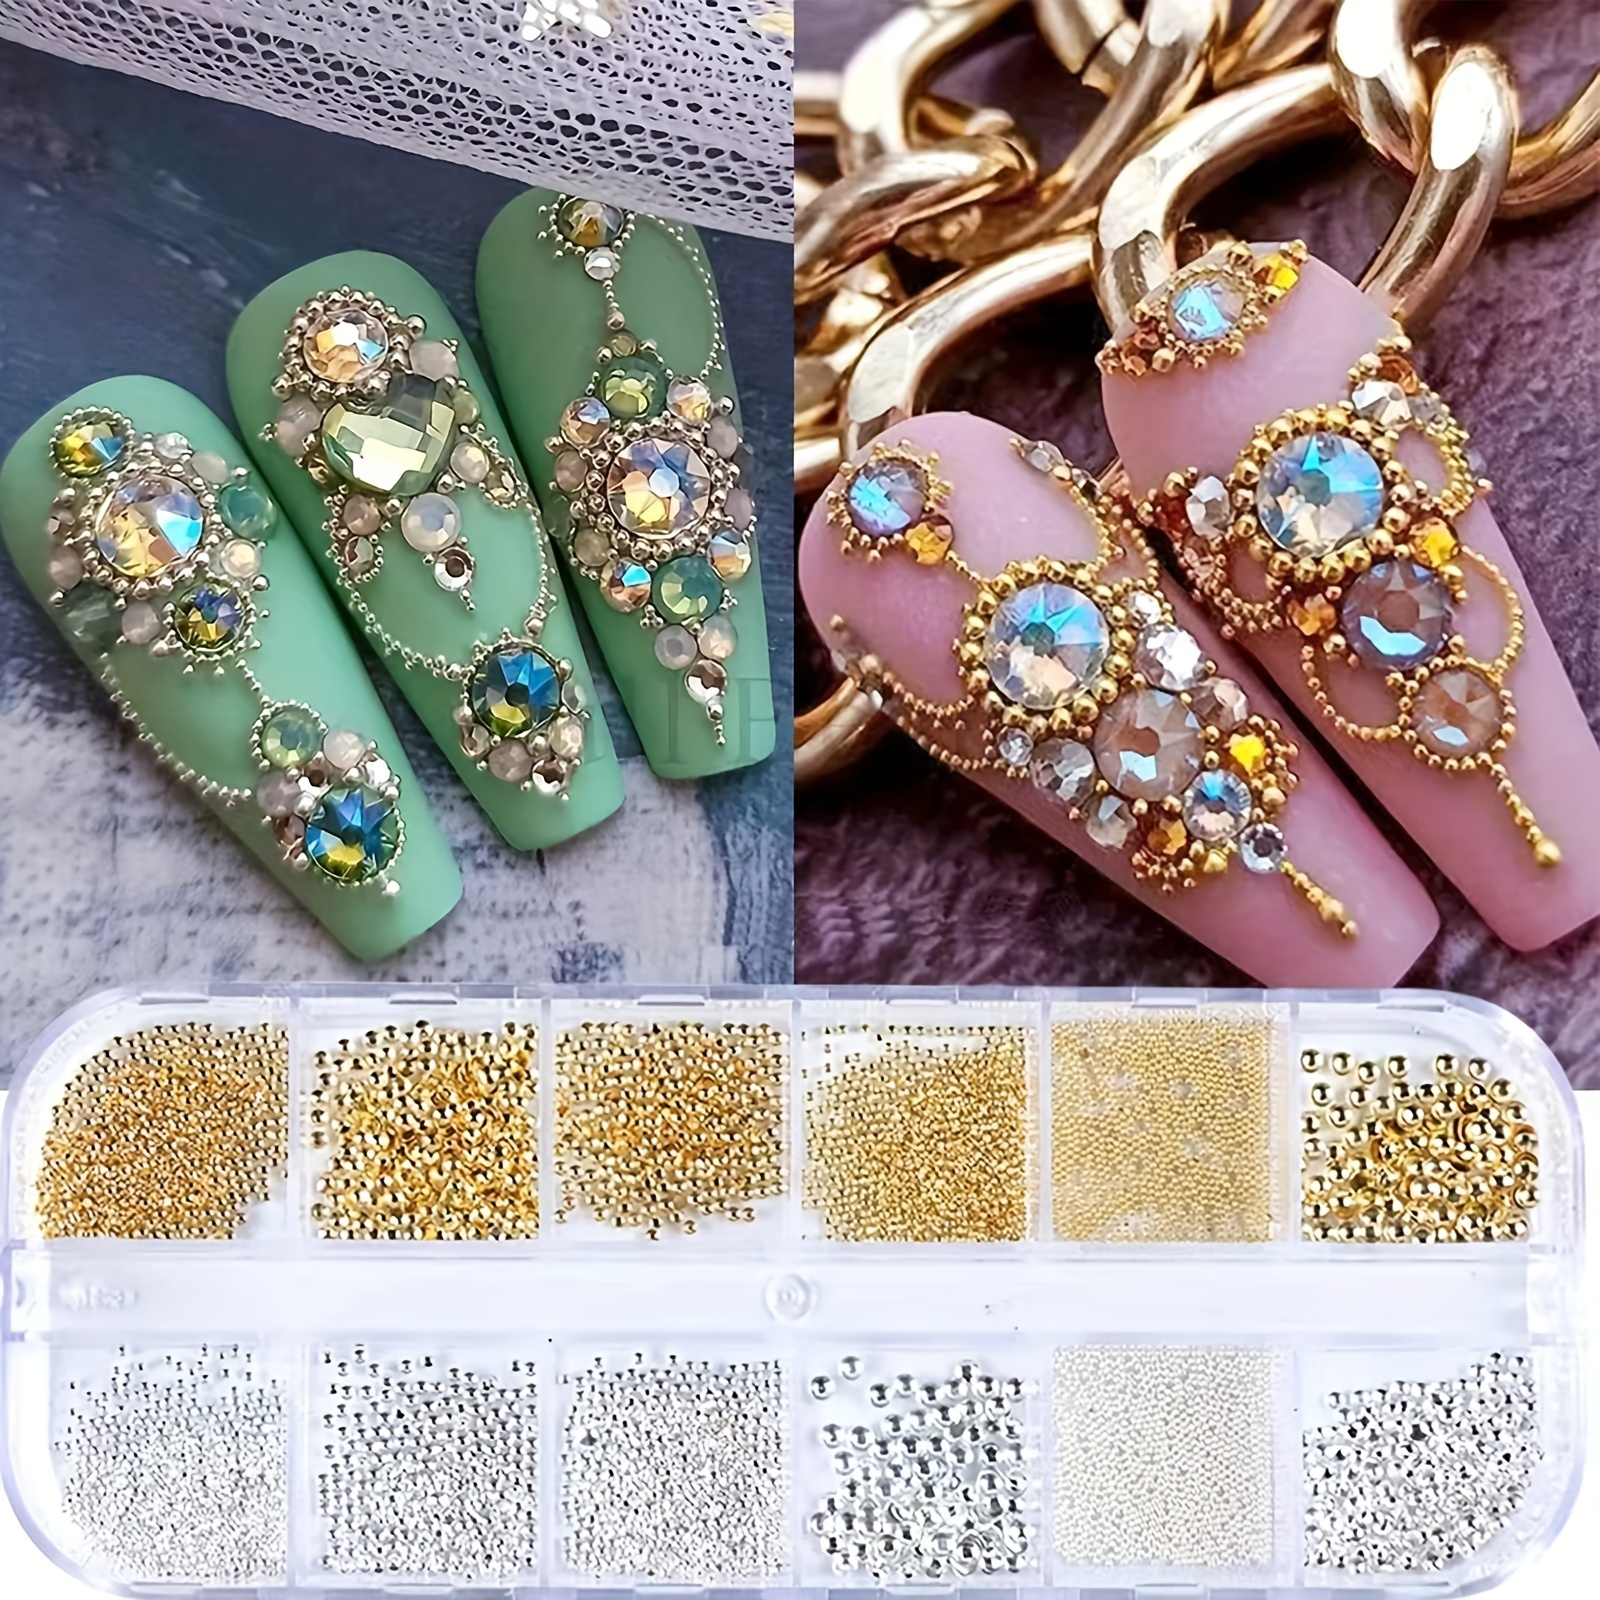 Nail Caviar Beads With Tweezers,nail Art Metal Mini Beads,multi Size Nail  Design Round Steel Ball Beads Nail Art Caviar Beads For Nails Decoration  Accessories, Free Shipping For New Users